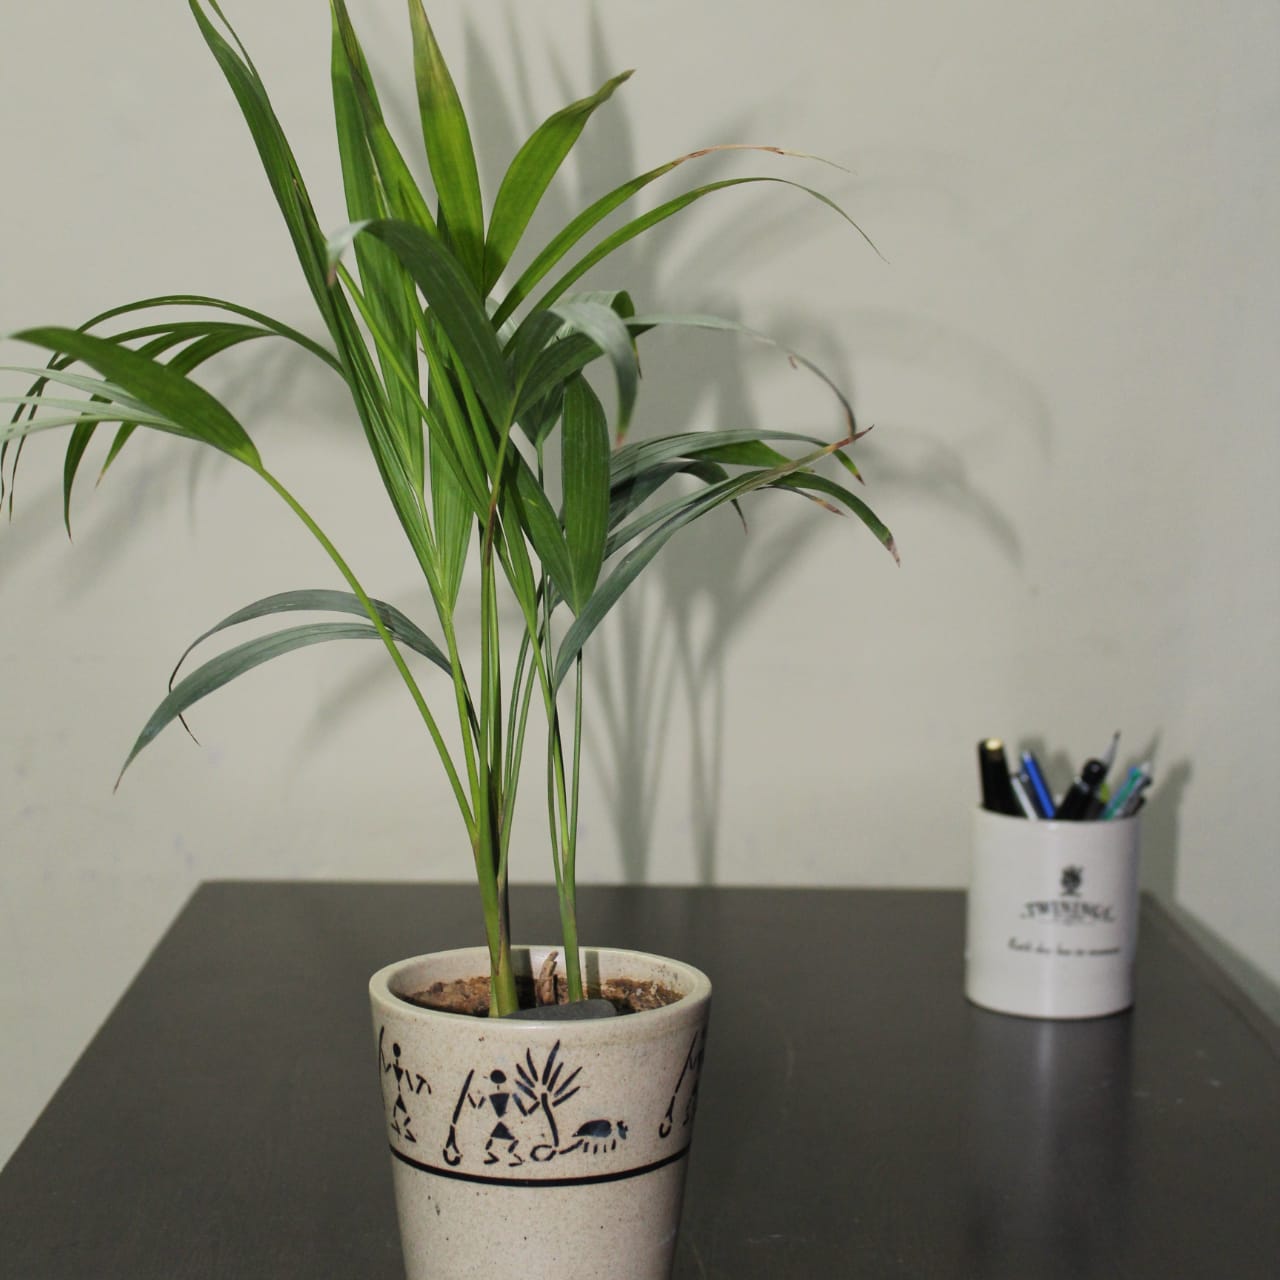 Potted areca palm